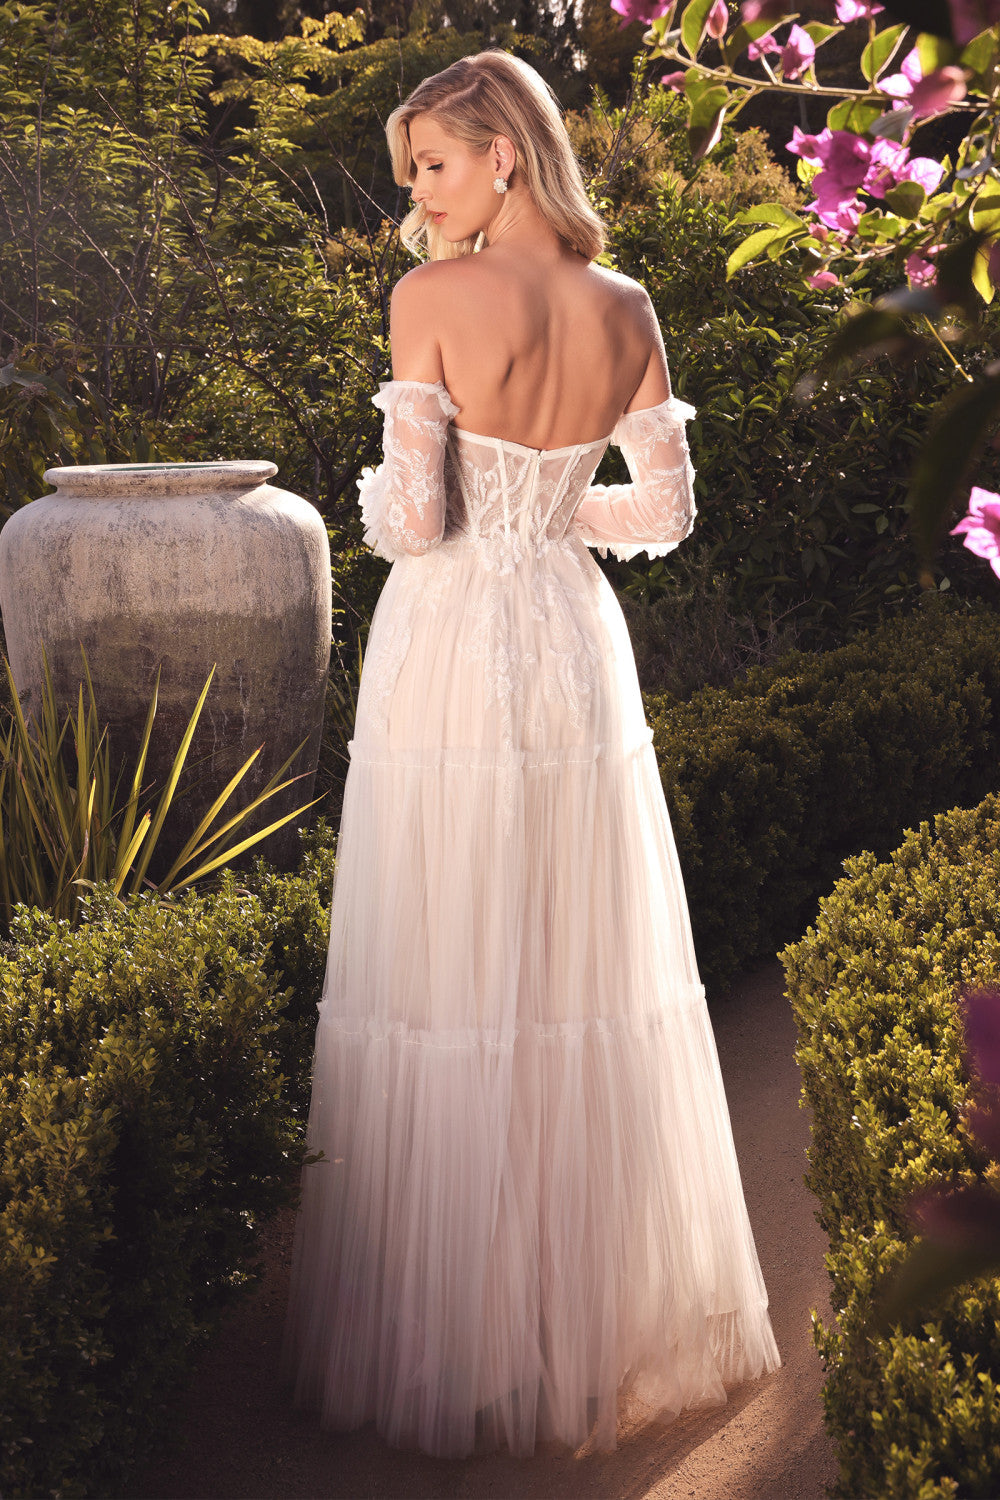 Boho Tulle Ruffles Sweetheart Bodice A-Line Wedding/Bridal Gown by Andrea & Leo Couture - A1037W Sonia